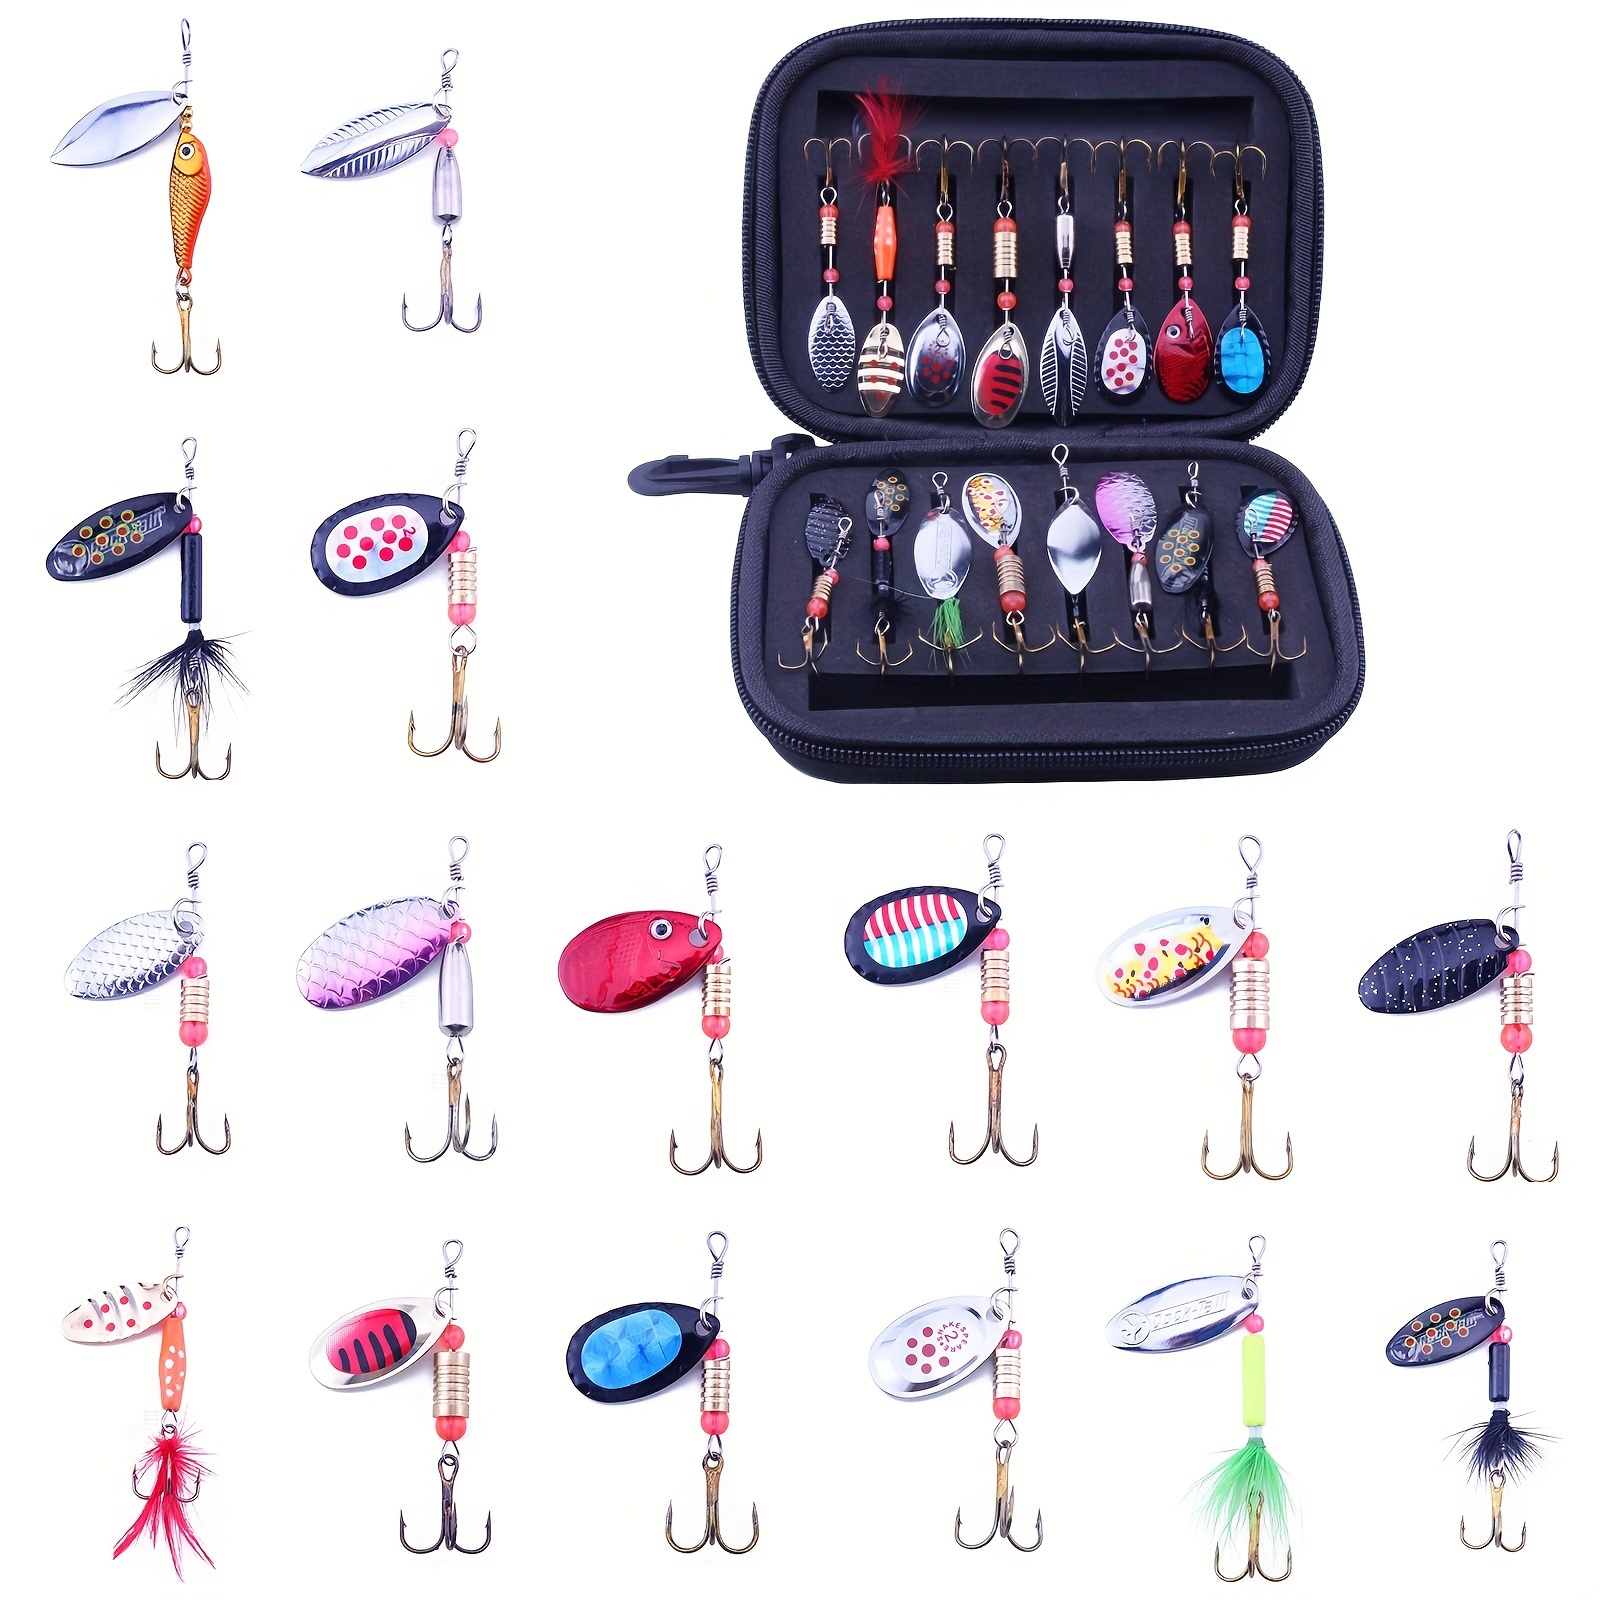 Gbruno Store GBruno - 383Pcs Fishing Lures Tackle Box Bass Fishing Animated  Lure Crankbaits Spinnerbaits Soft Plastic Worm Saltwater Freshwater Fishing  Kit - Multi - 15 requests